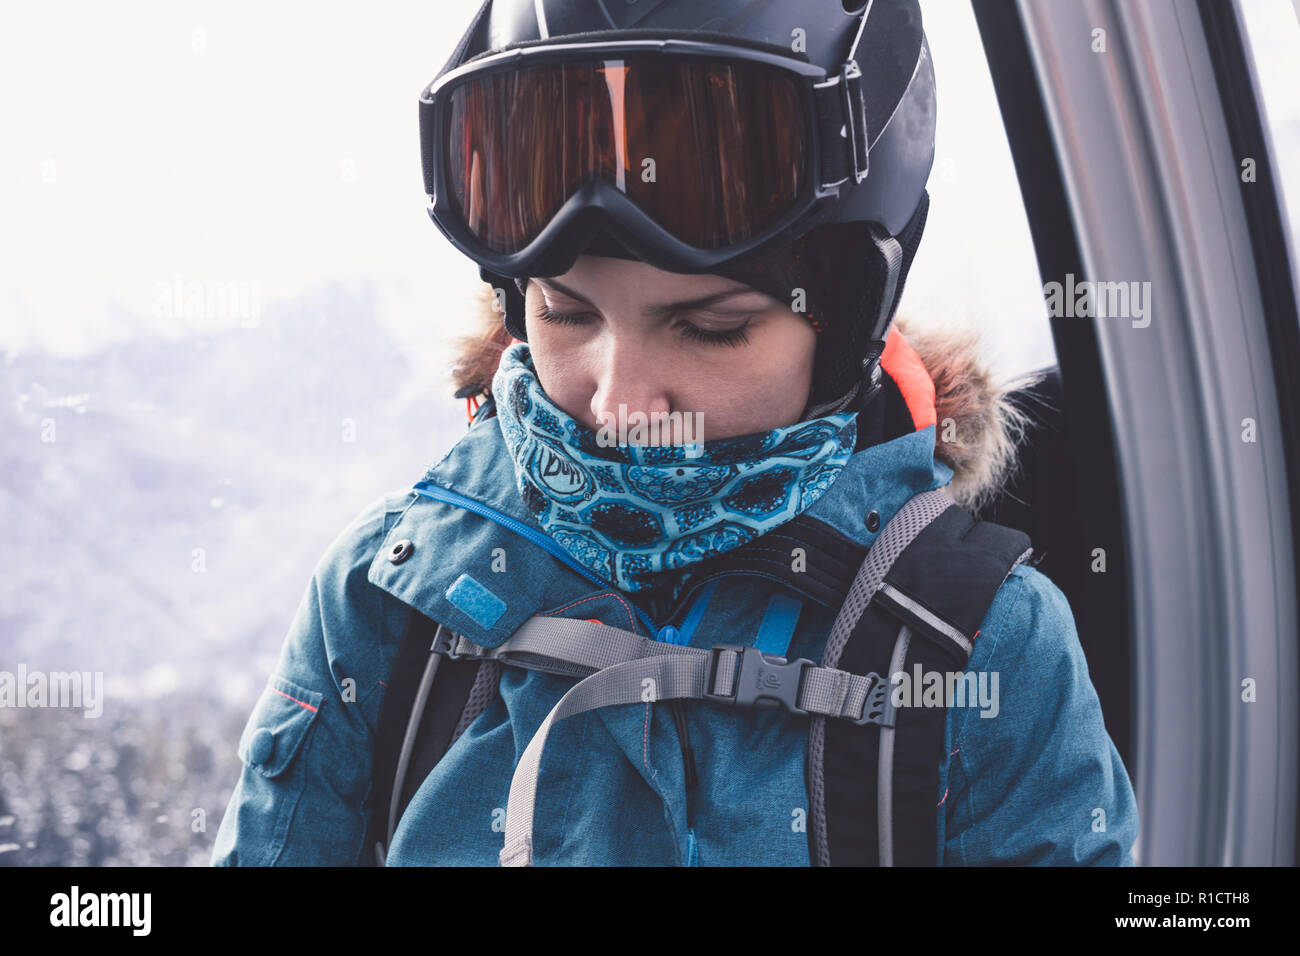 Happy girl on ski resort. Snowboarder on vacation. Lifestyle Concept Adventure winter physical activities. Stock Photo